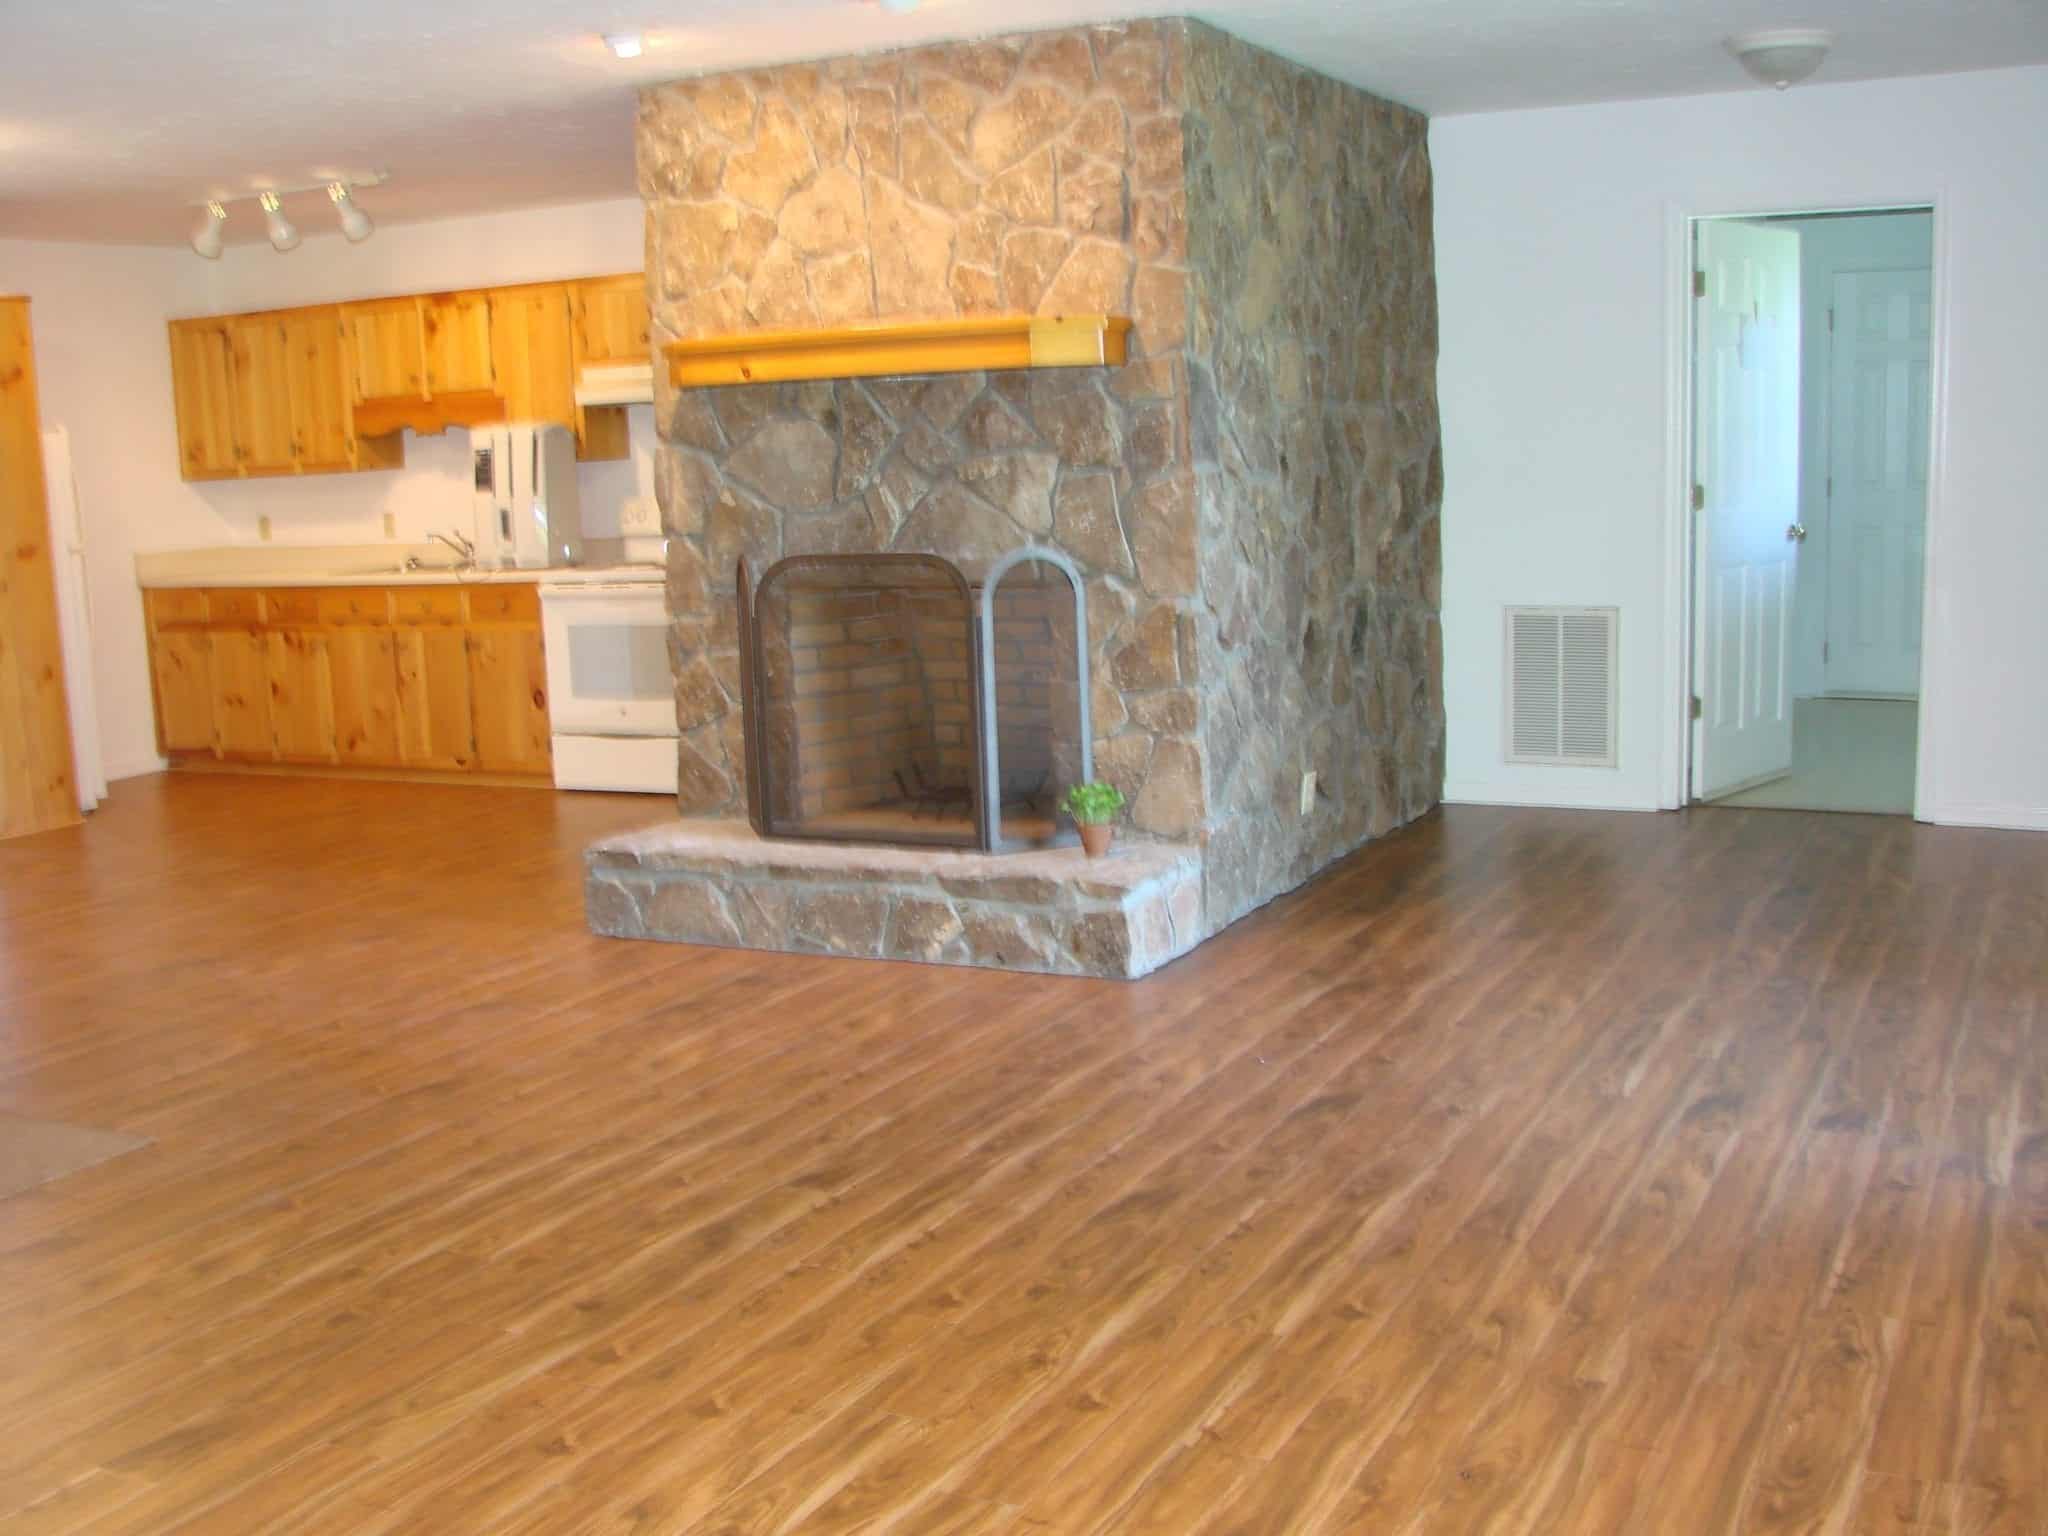 A vacation rental in Murphy NC with wood floors and a stone fireplace.